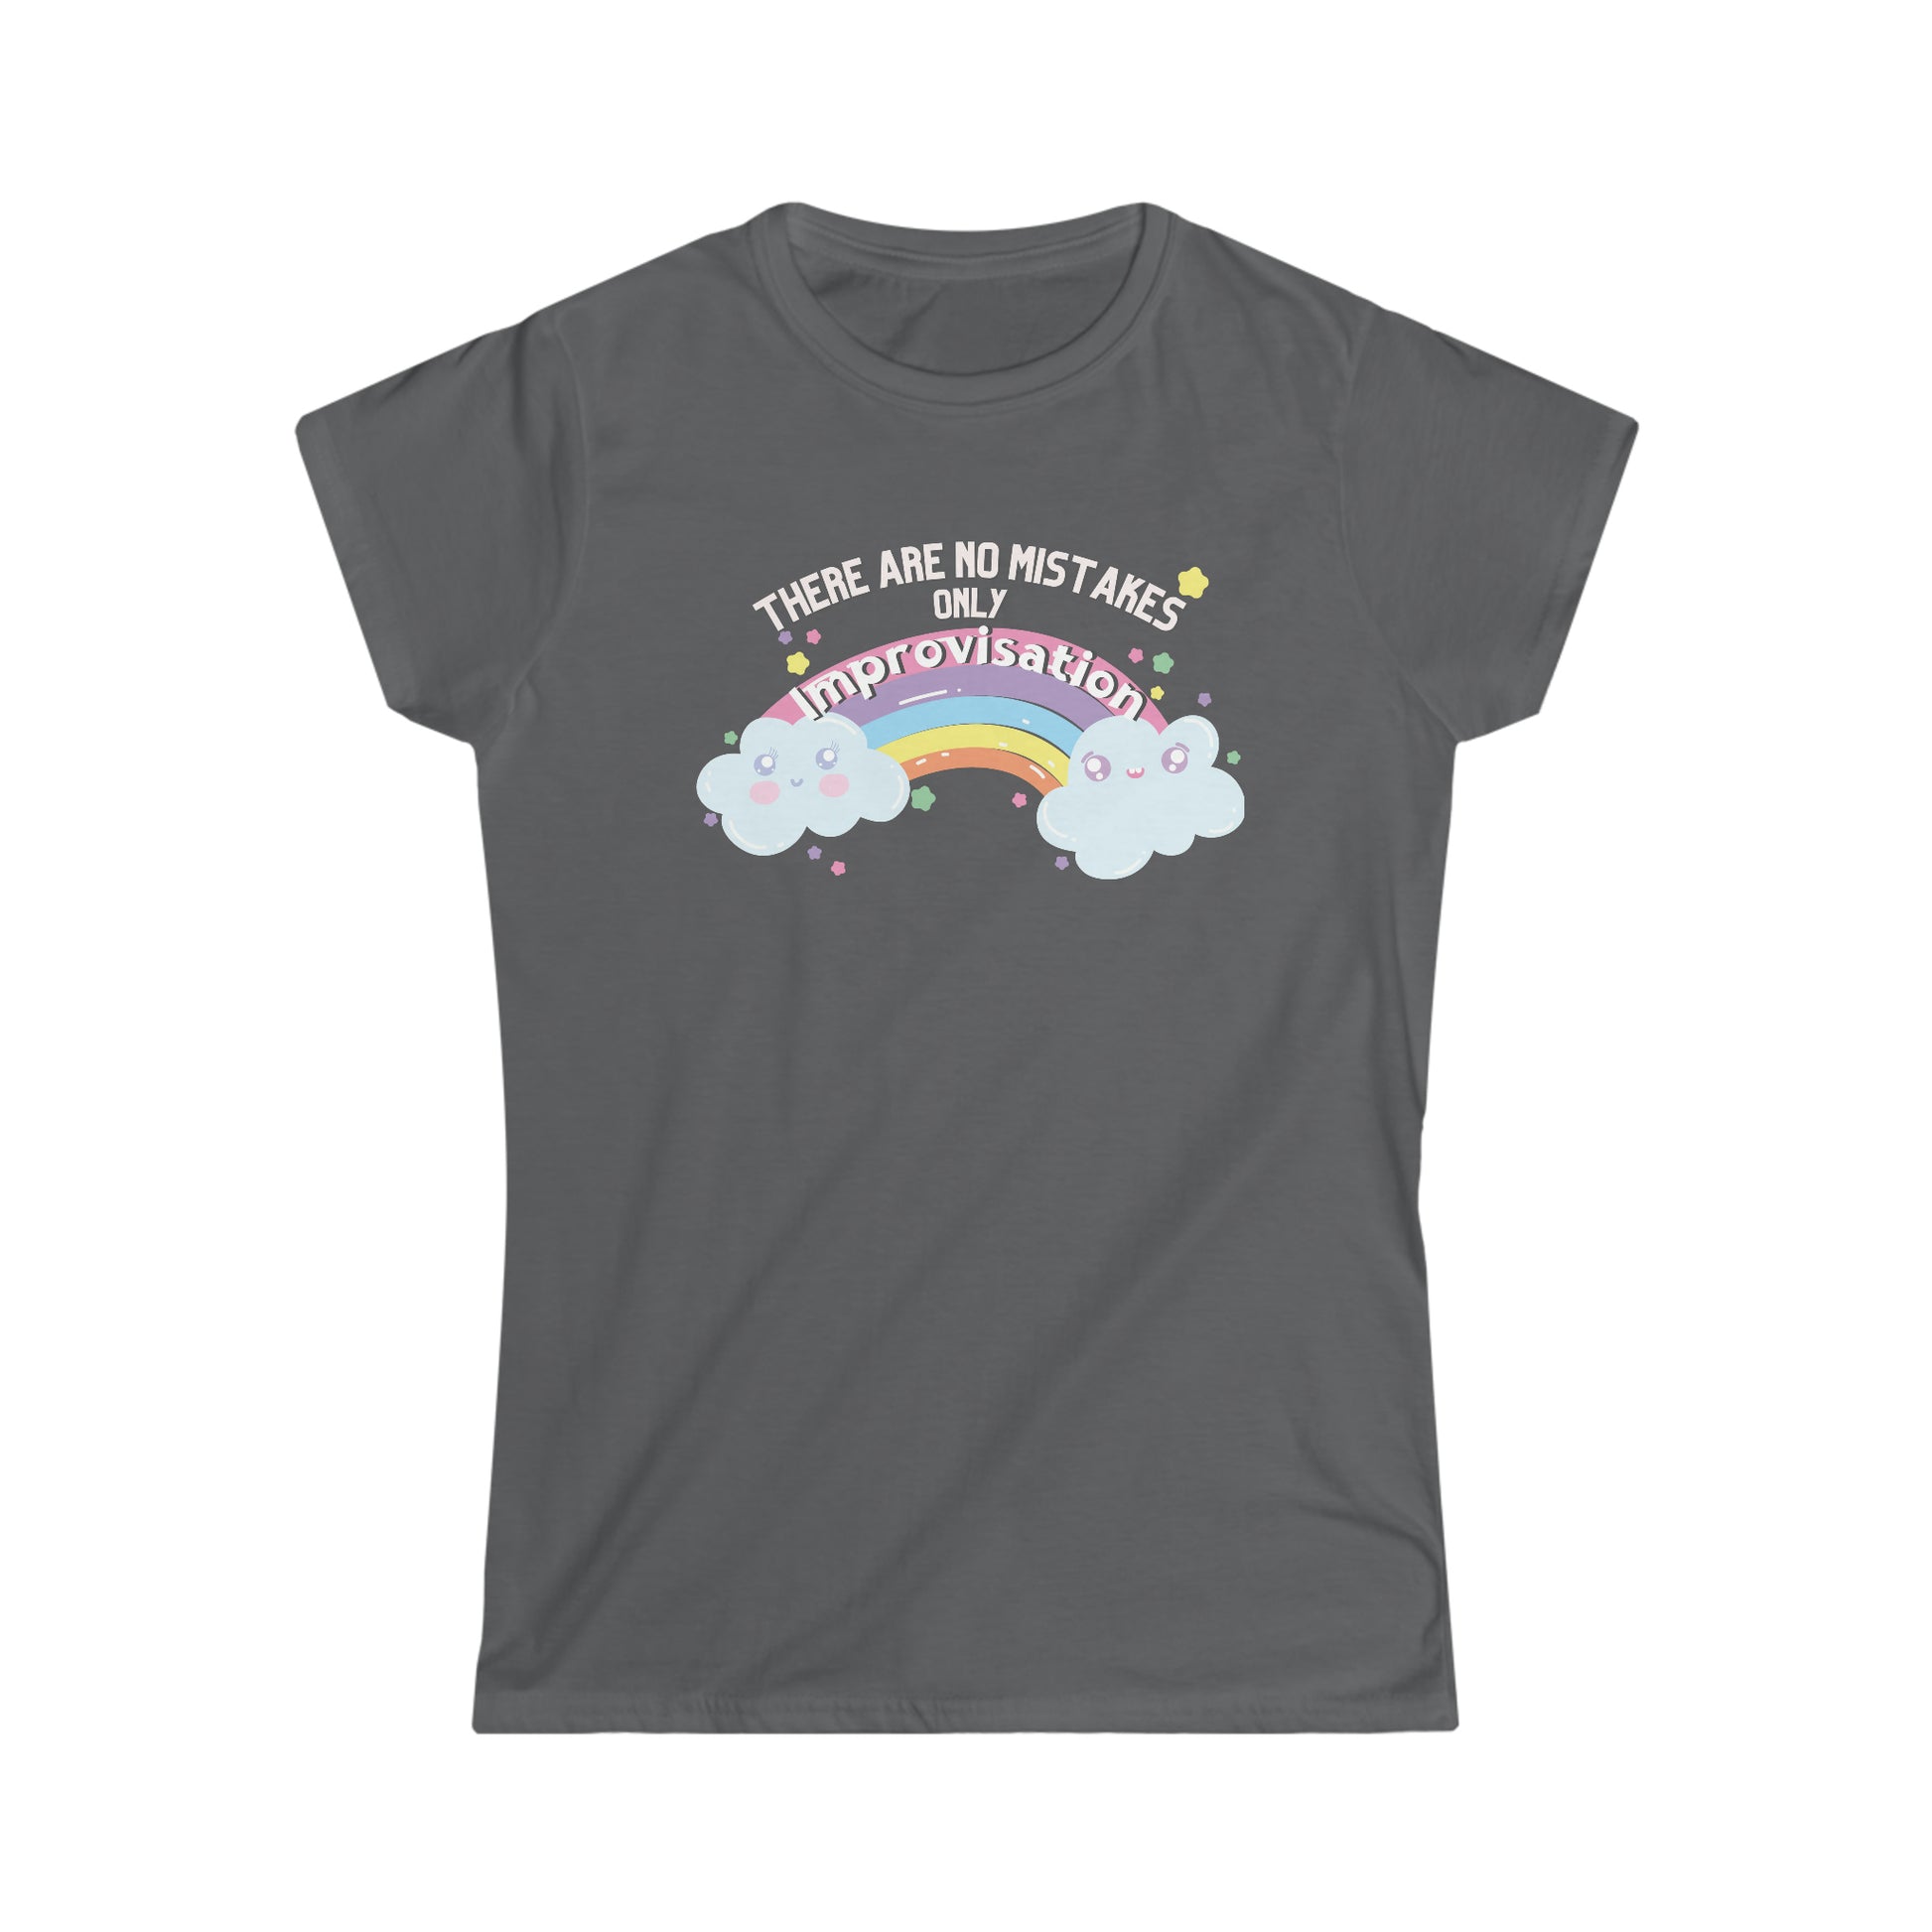 A T-shirt with the text "there are no mistakes only improvisation" and two happy clouds connected by a rainbow